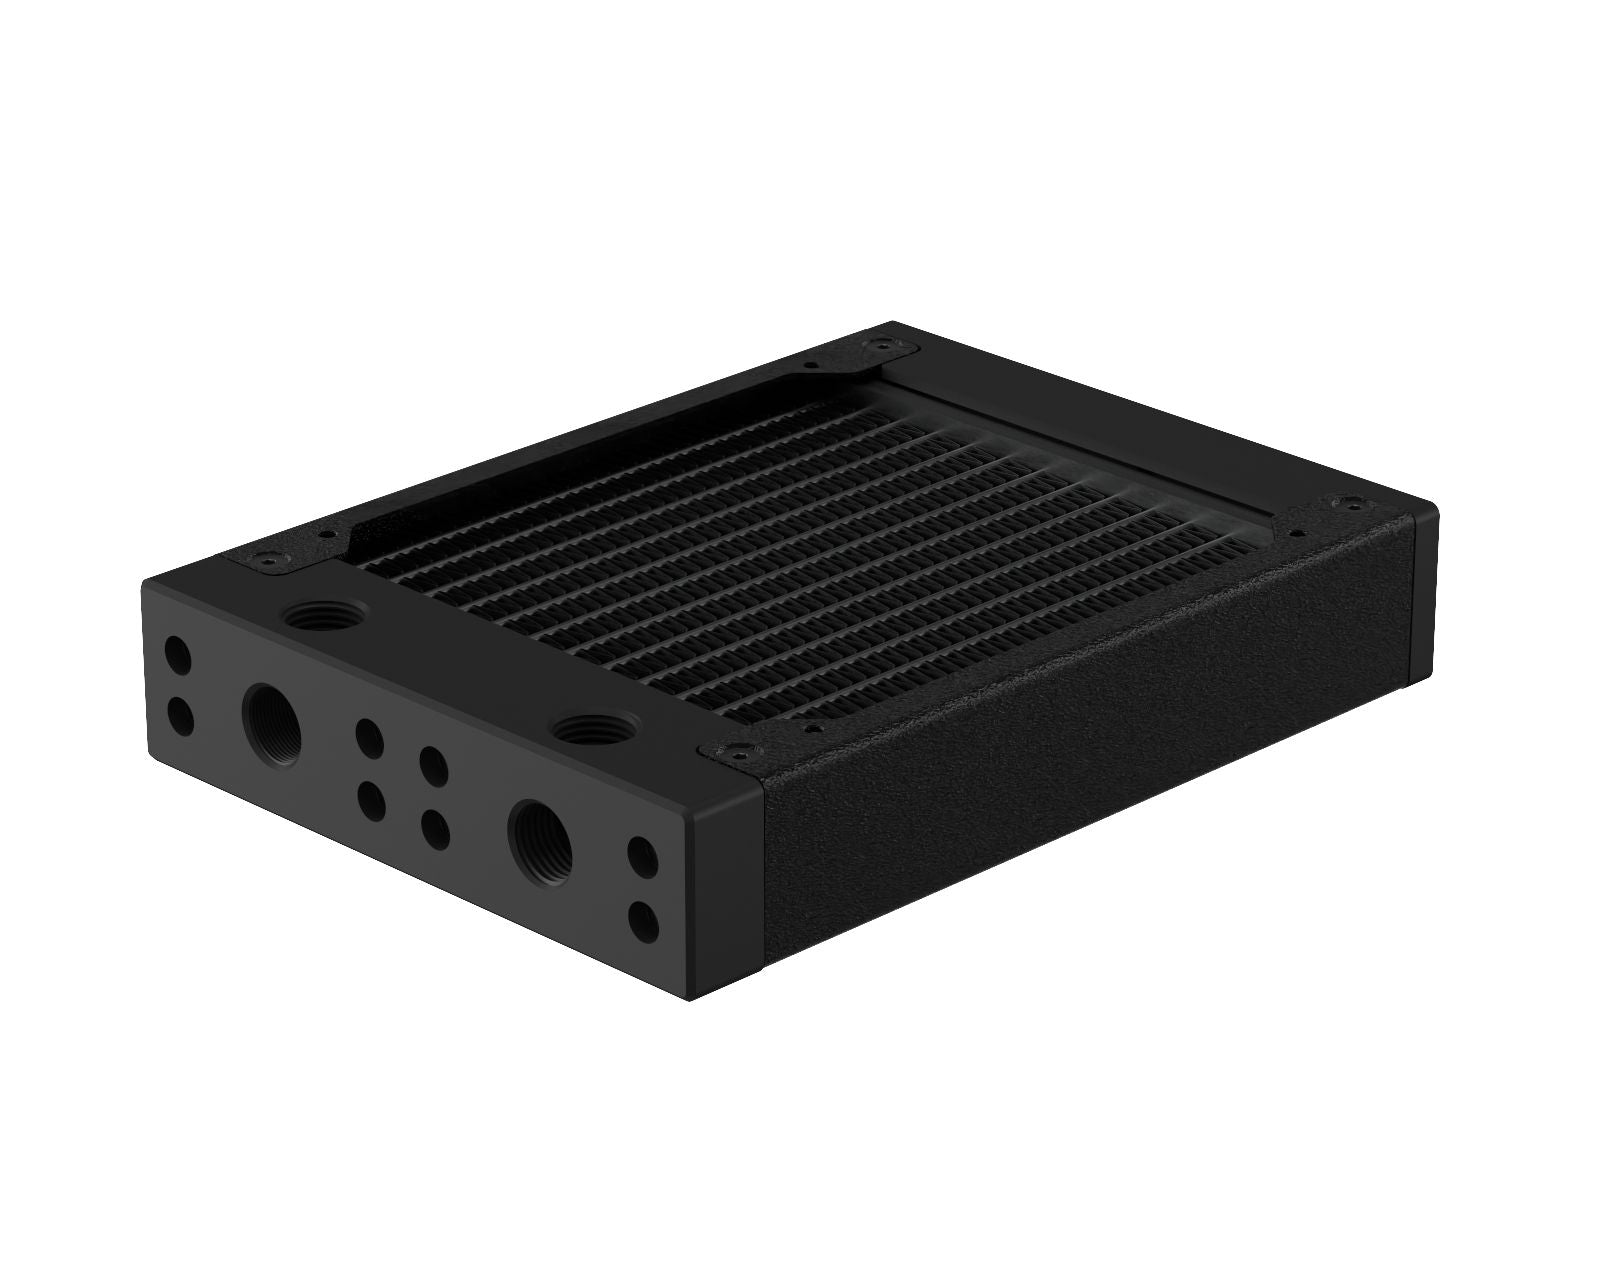 PrimoChill 120SL (30mm) EXIMO Modular Radiator, Black POM, 1x120mm, Single Fan (R-SL-BK12) Available in 20+ Colors, Assembled in USA and Custom Watercooling Loop Ready - TX Matte Black